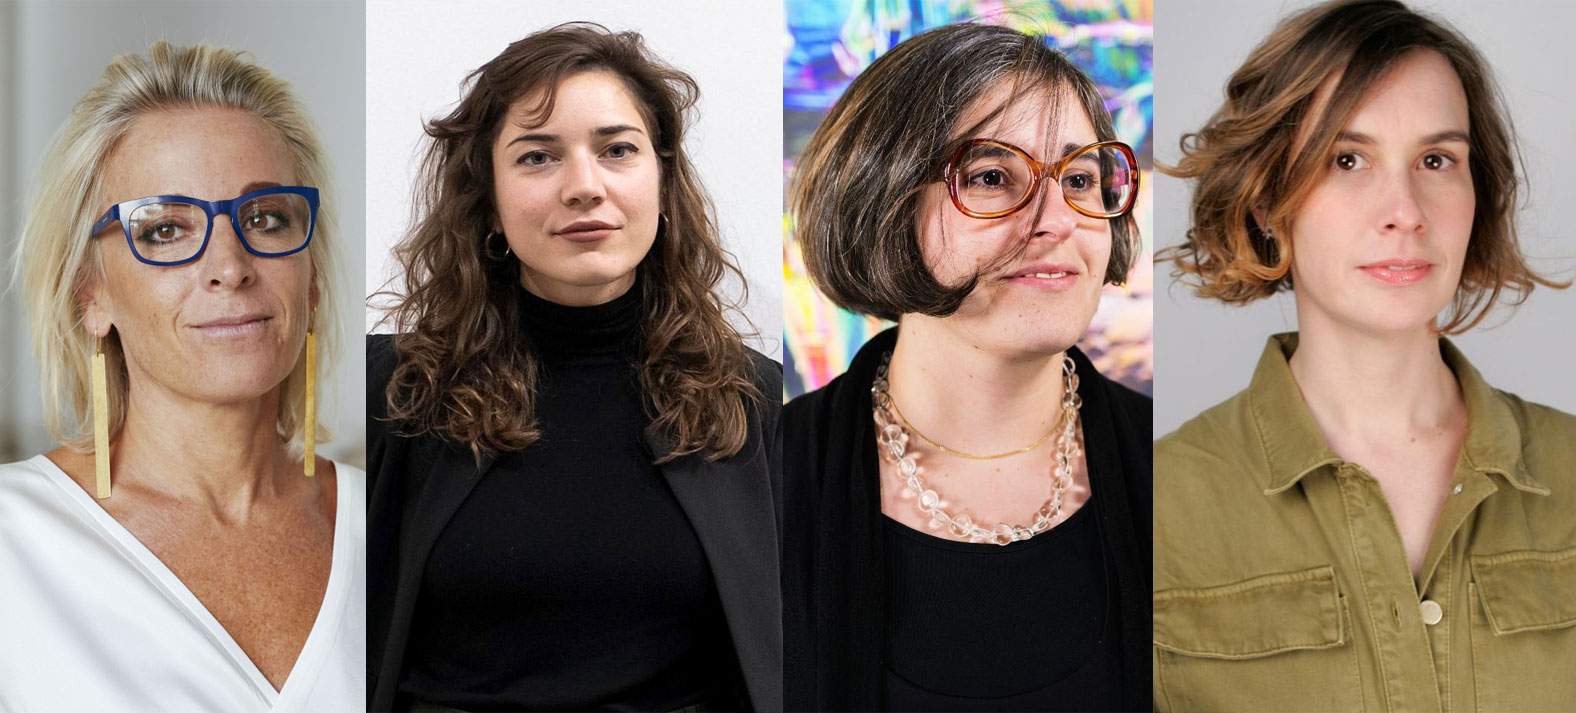 Turin, Sarah Cosulich new director of Pinacoteca Agnelli. She will be joined by three young